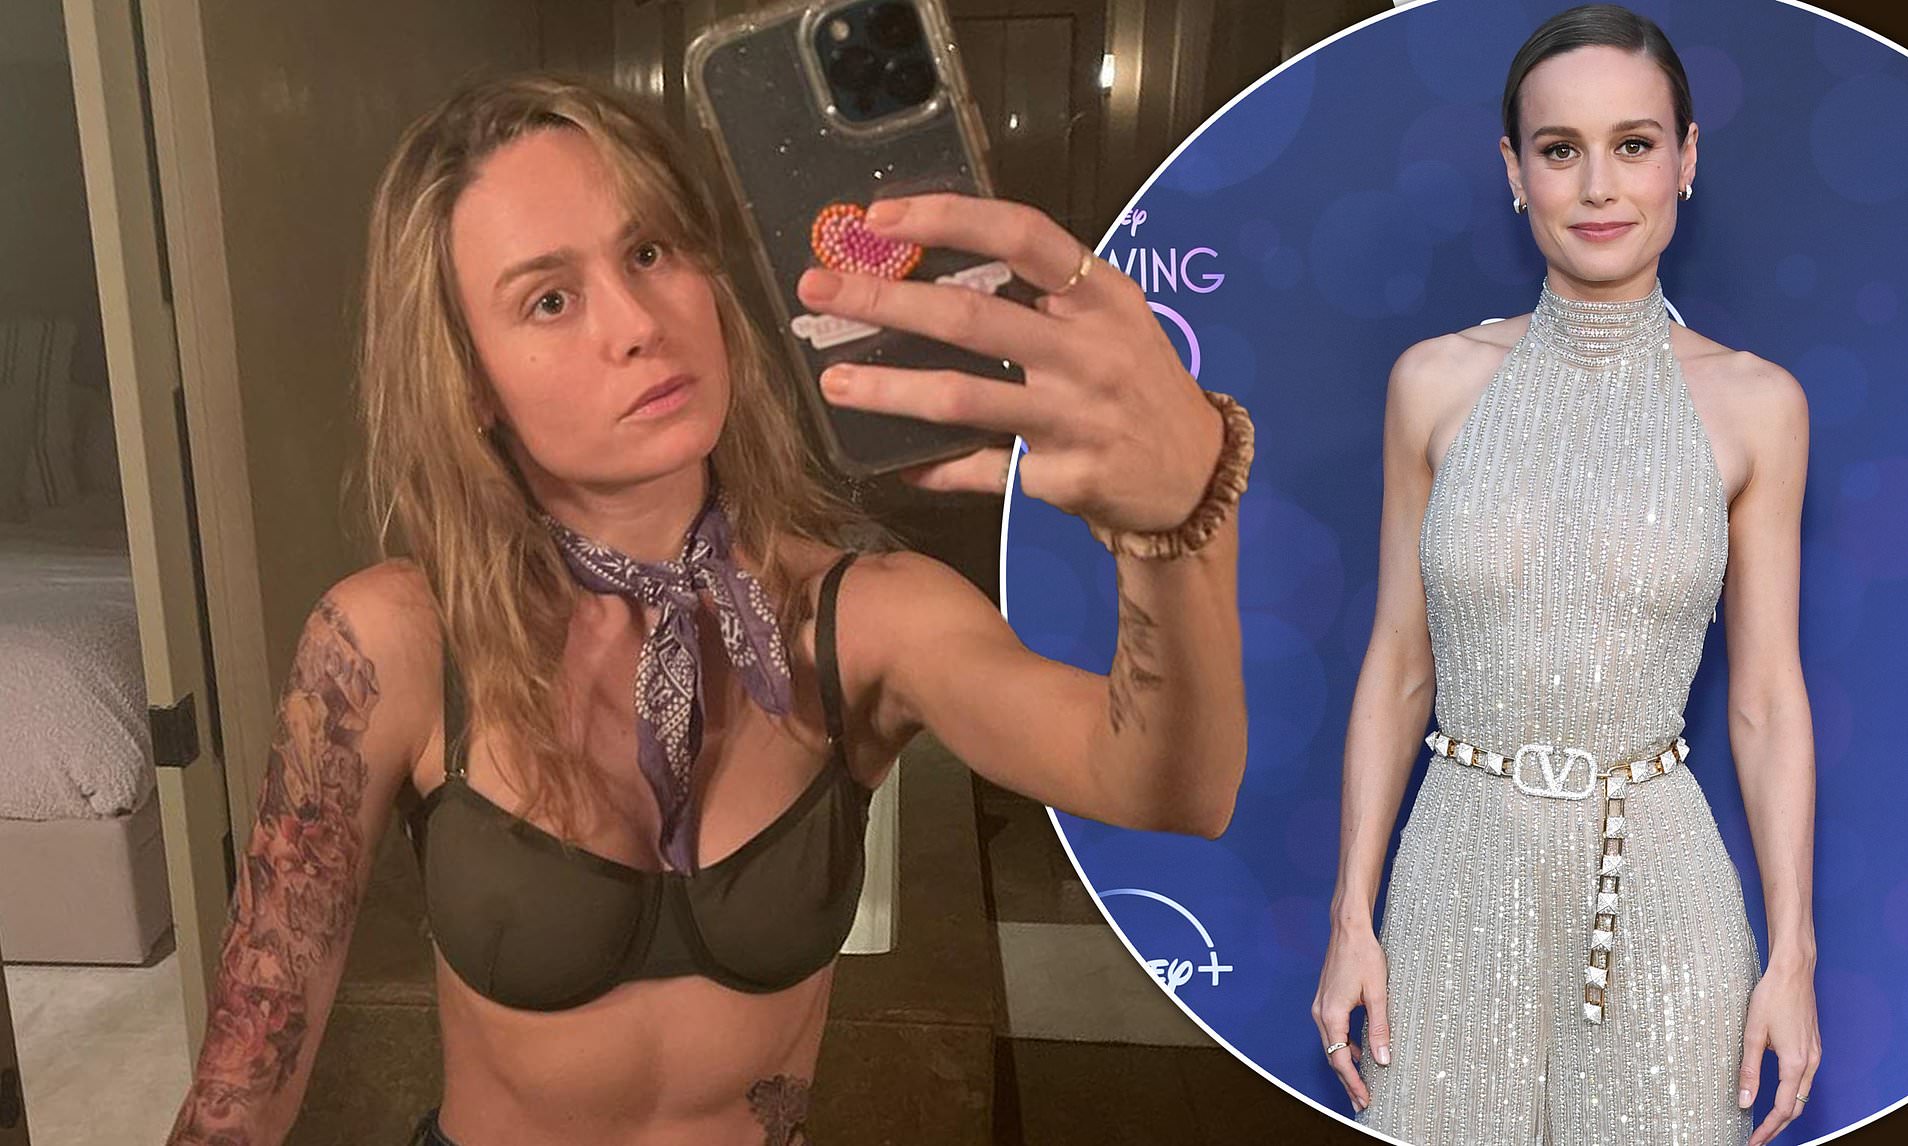 bubba berndt add photo does brie larson have fake boobs